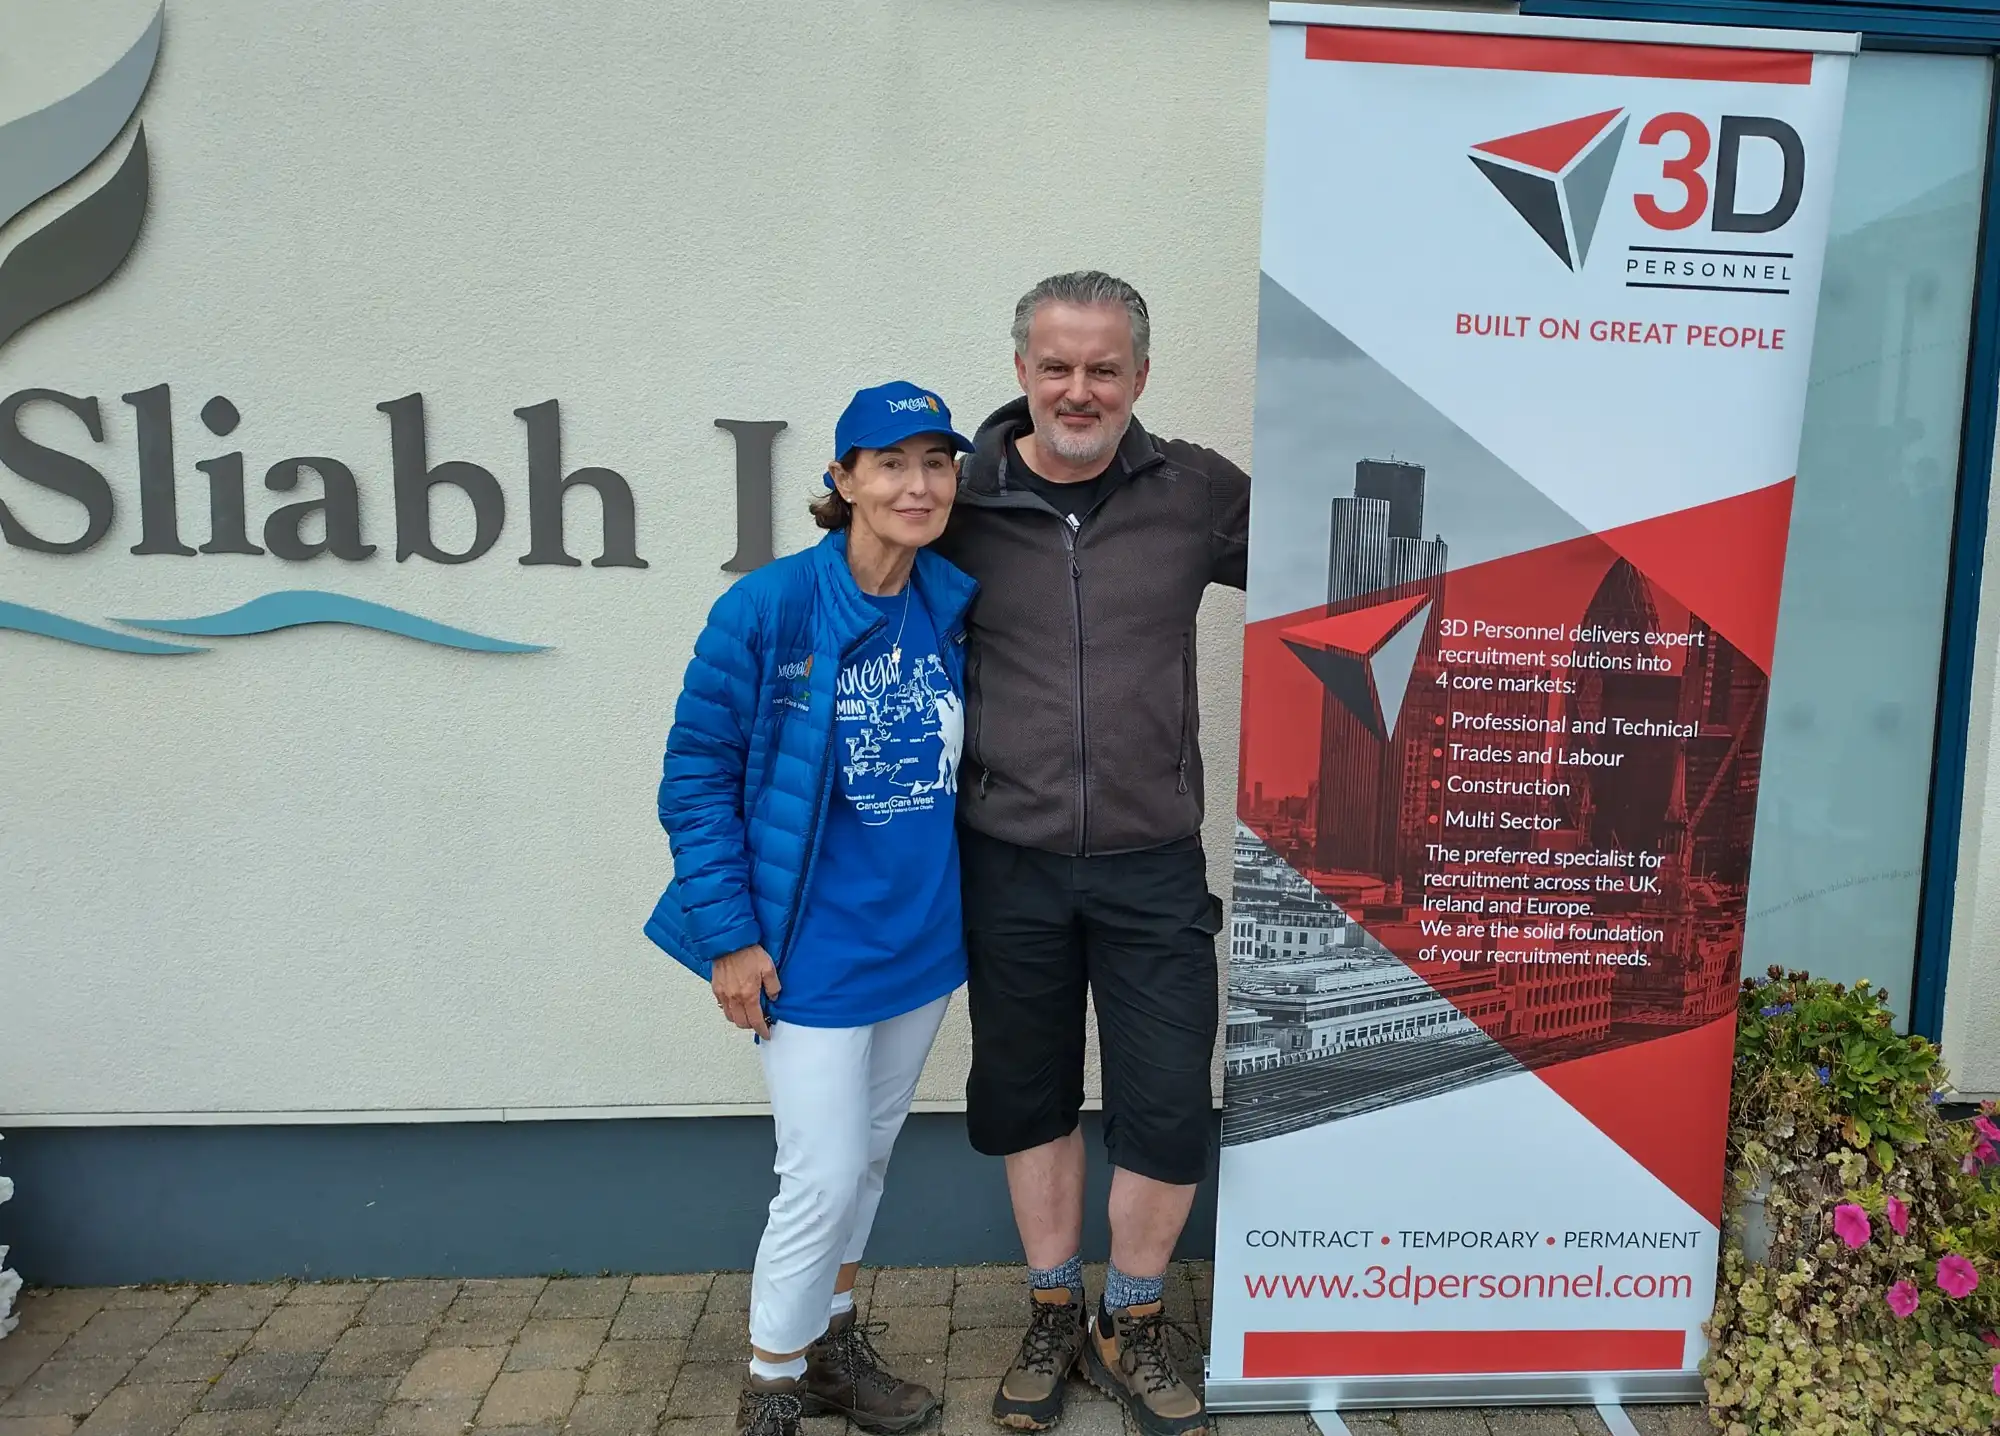 Donegal Camino founder Peggy Stringer with Michael Cunningham from 3D Personnel